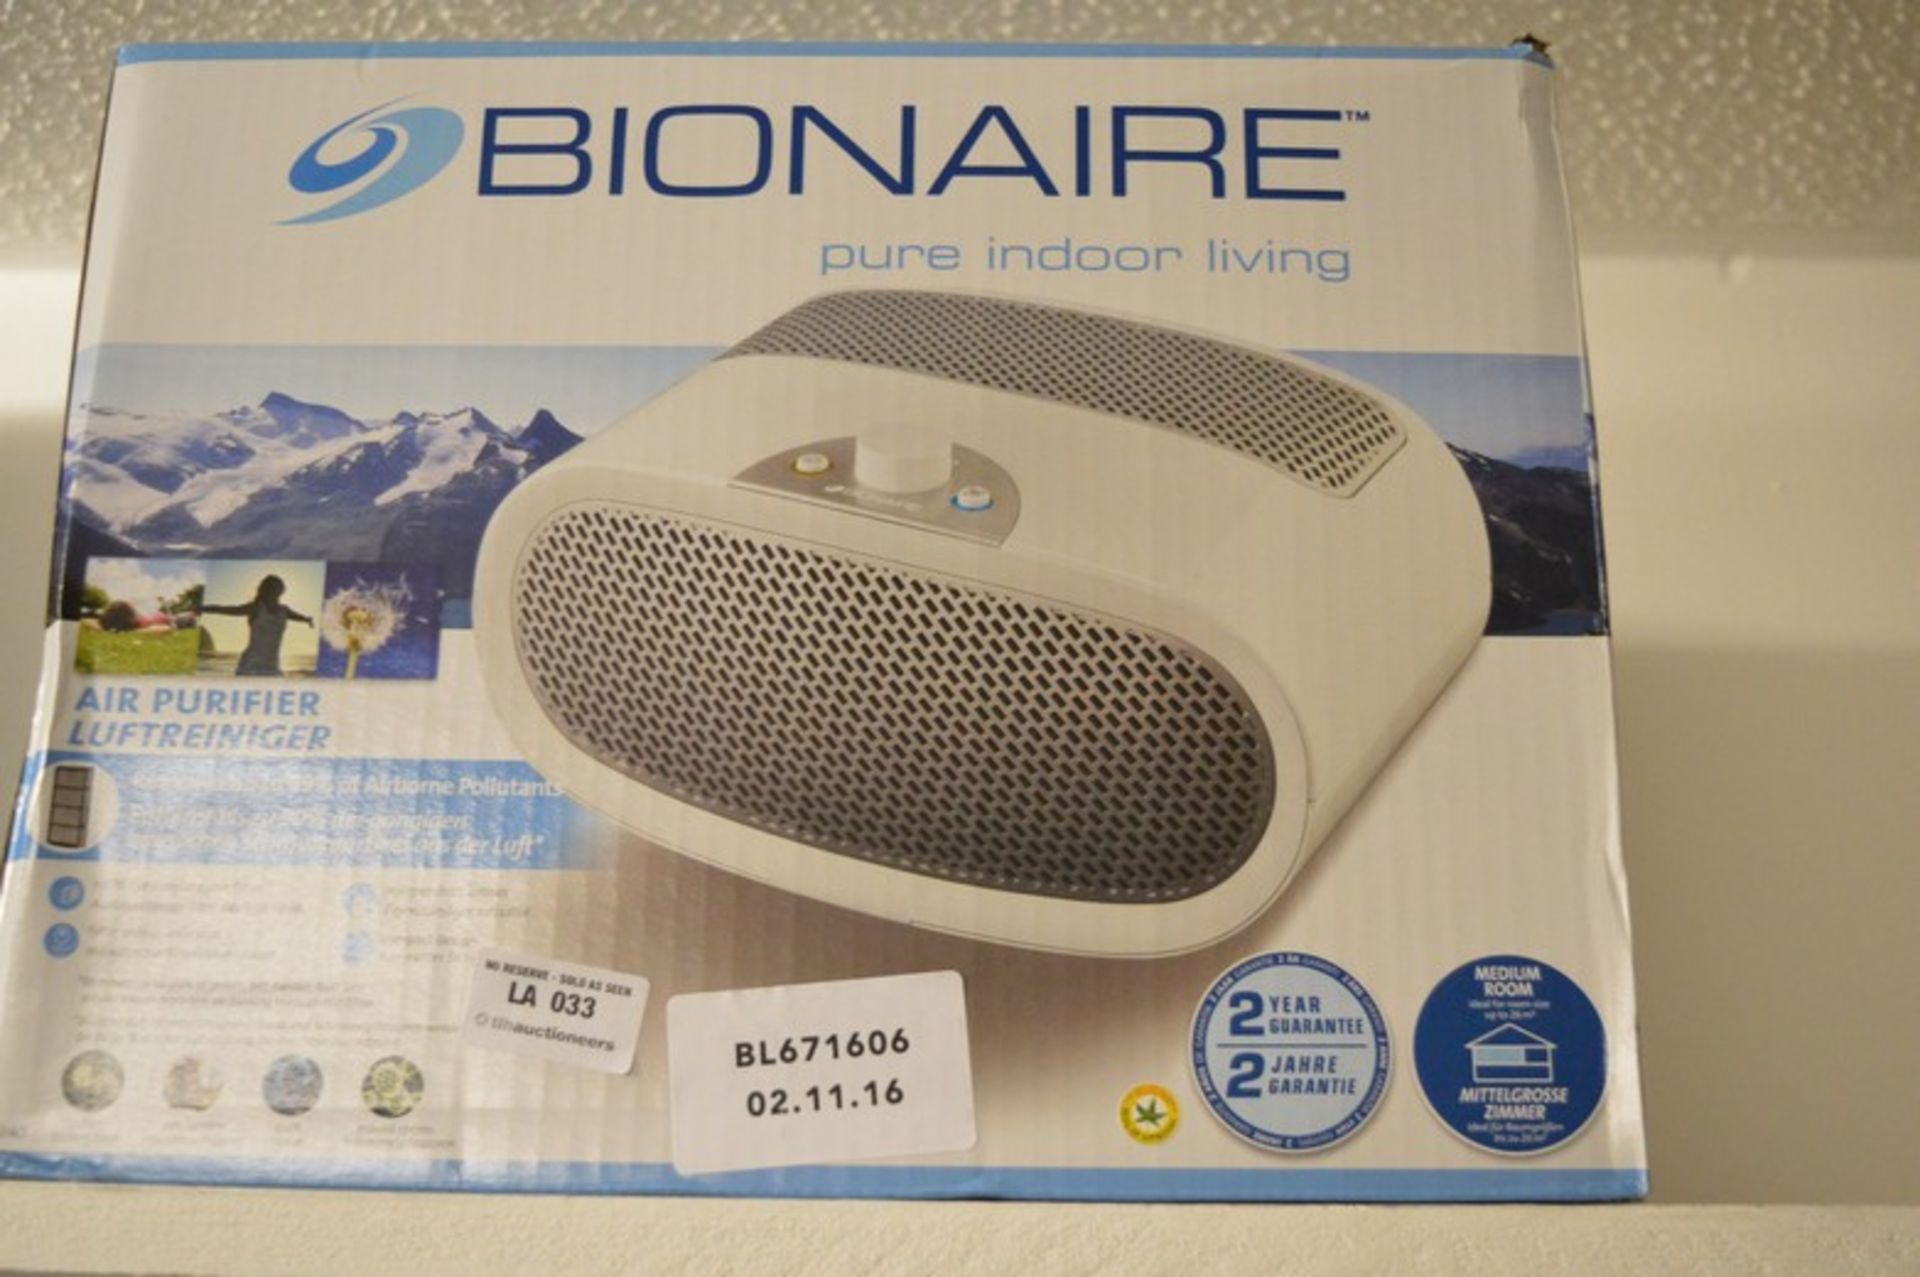 1 x BOXED BIONAIRE PURE INDOOR AIR PURIFIER RRP £35 02.11.16 *PLEASE NOTE THAT THE BID PRICE IS